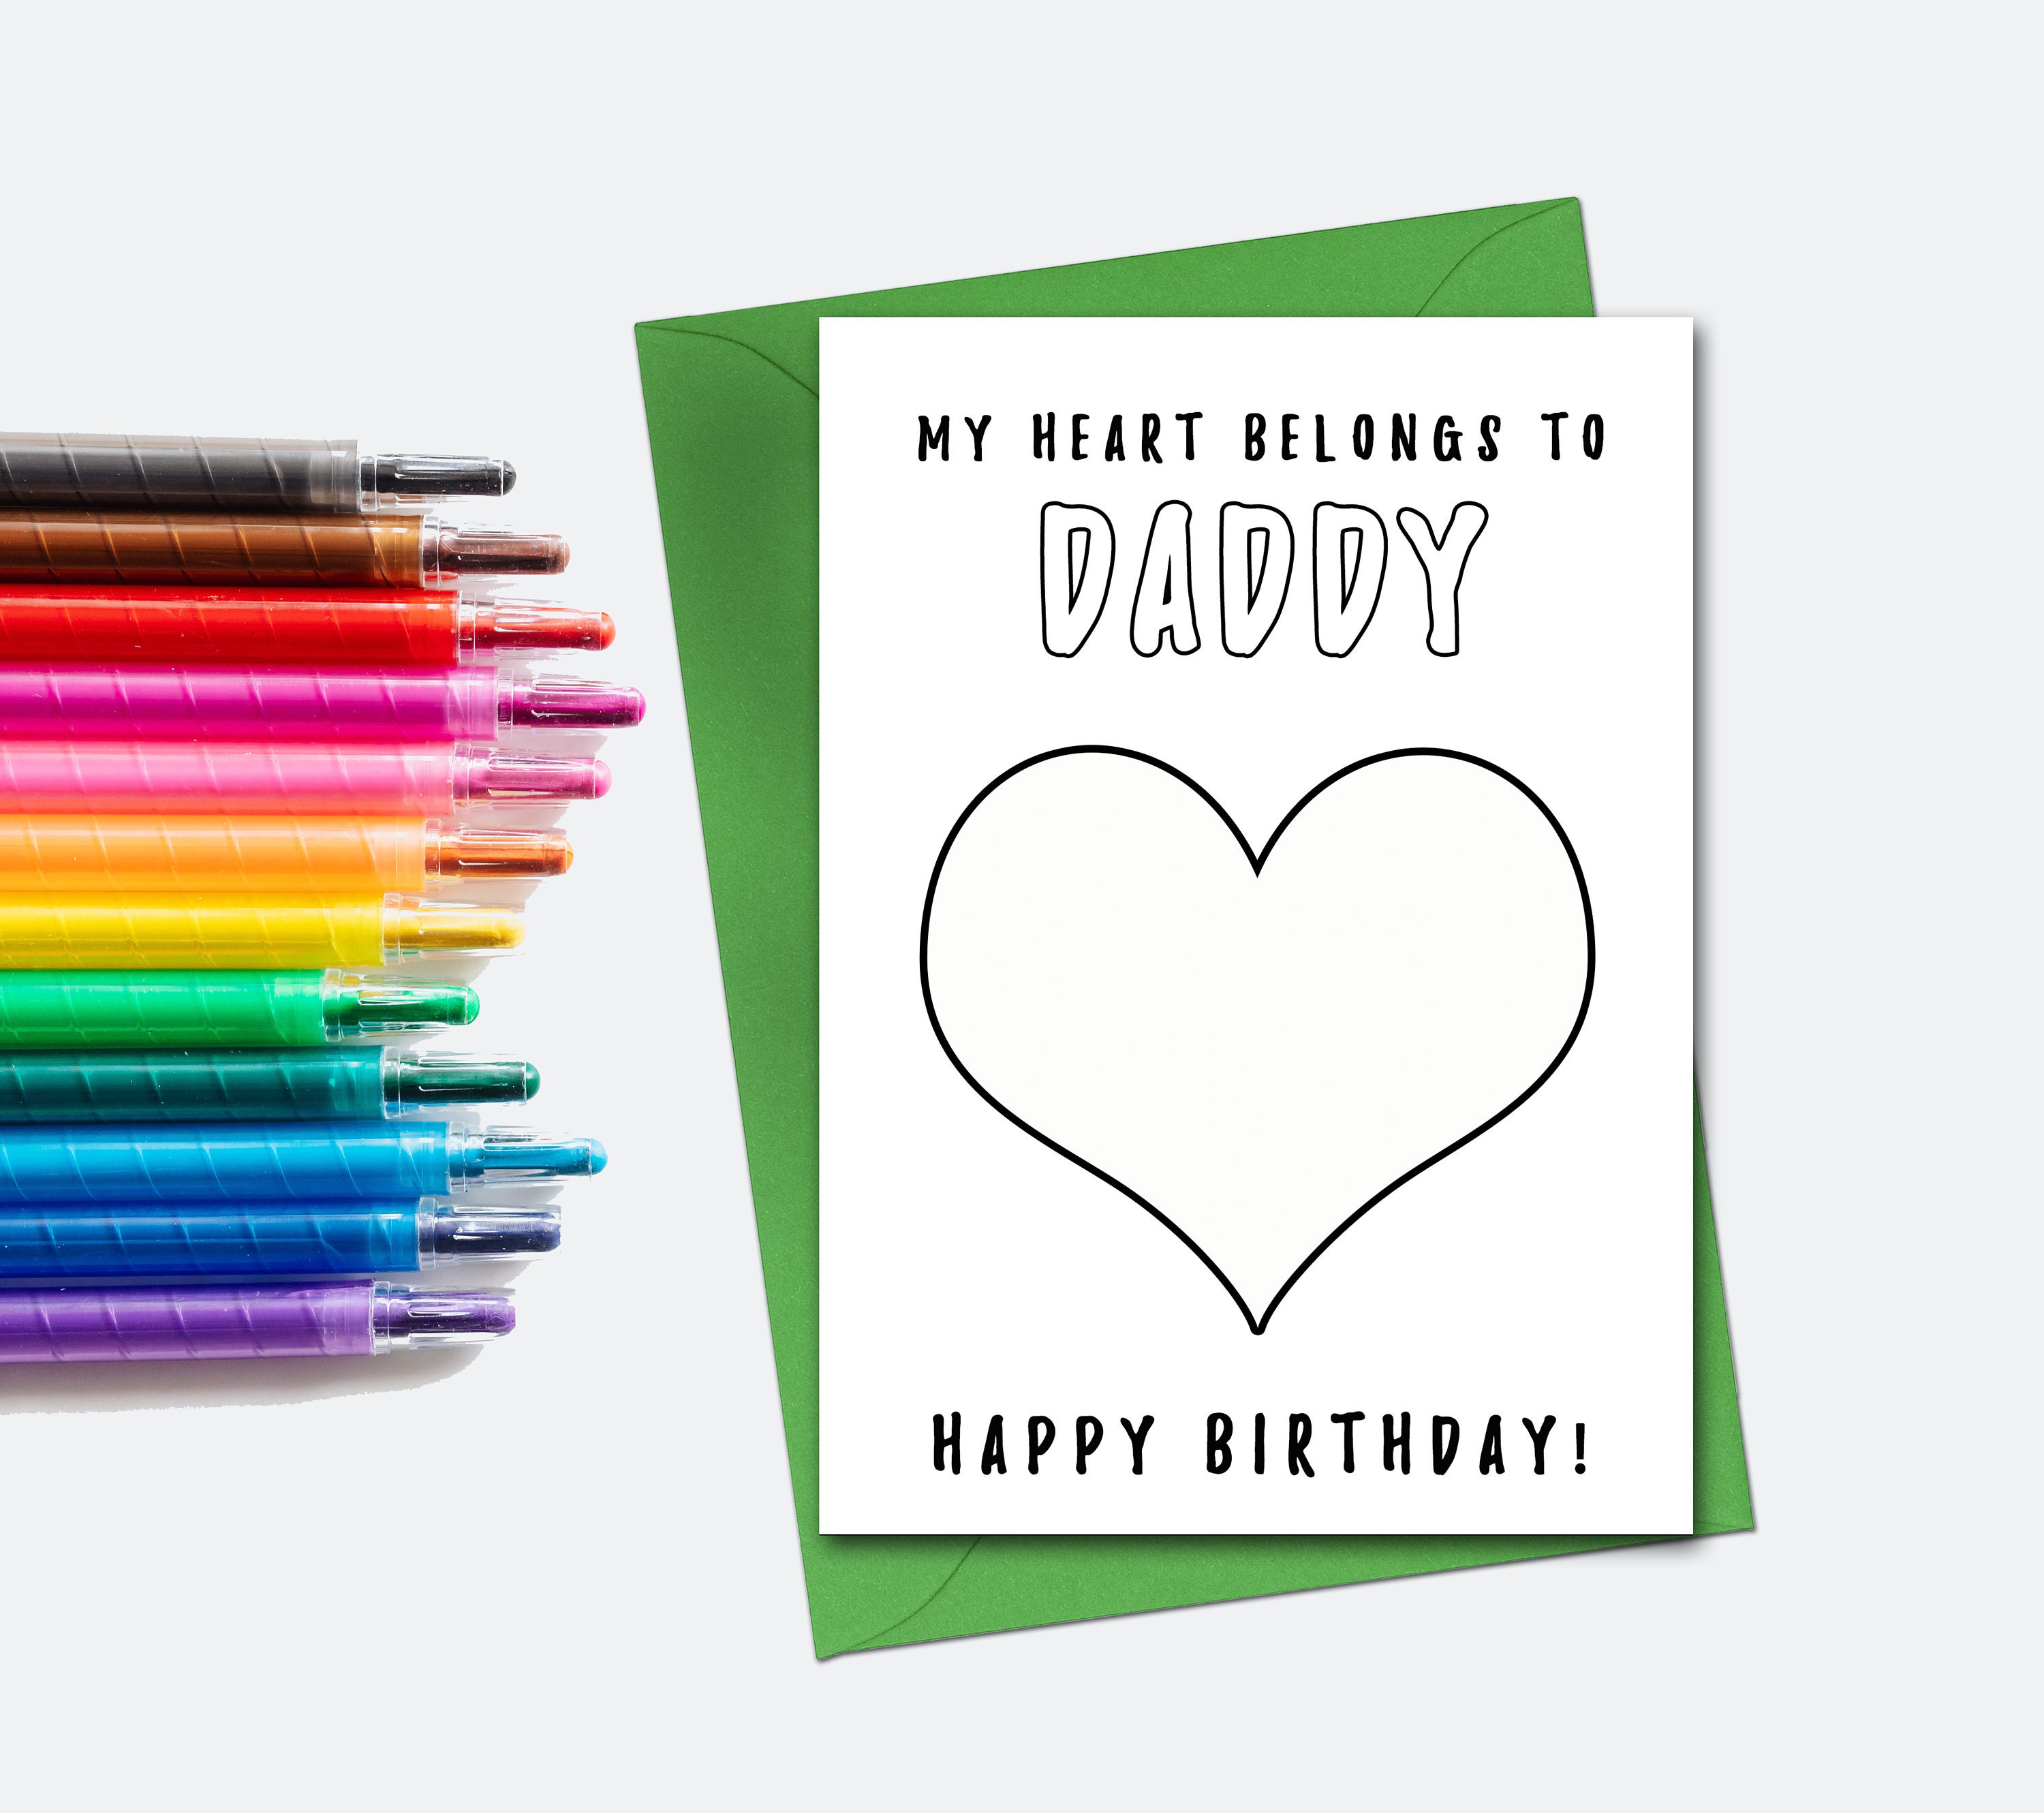 64 Collection Coloring Pages Birthday Card For Dad  Latest Free